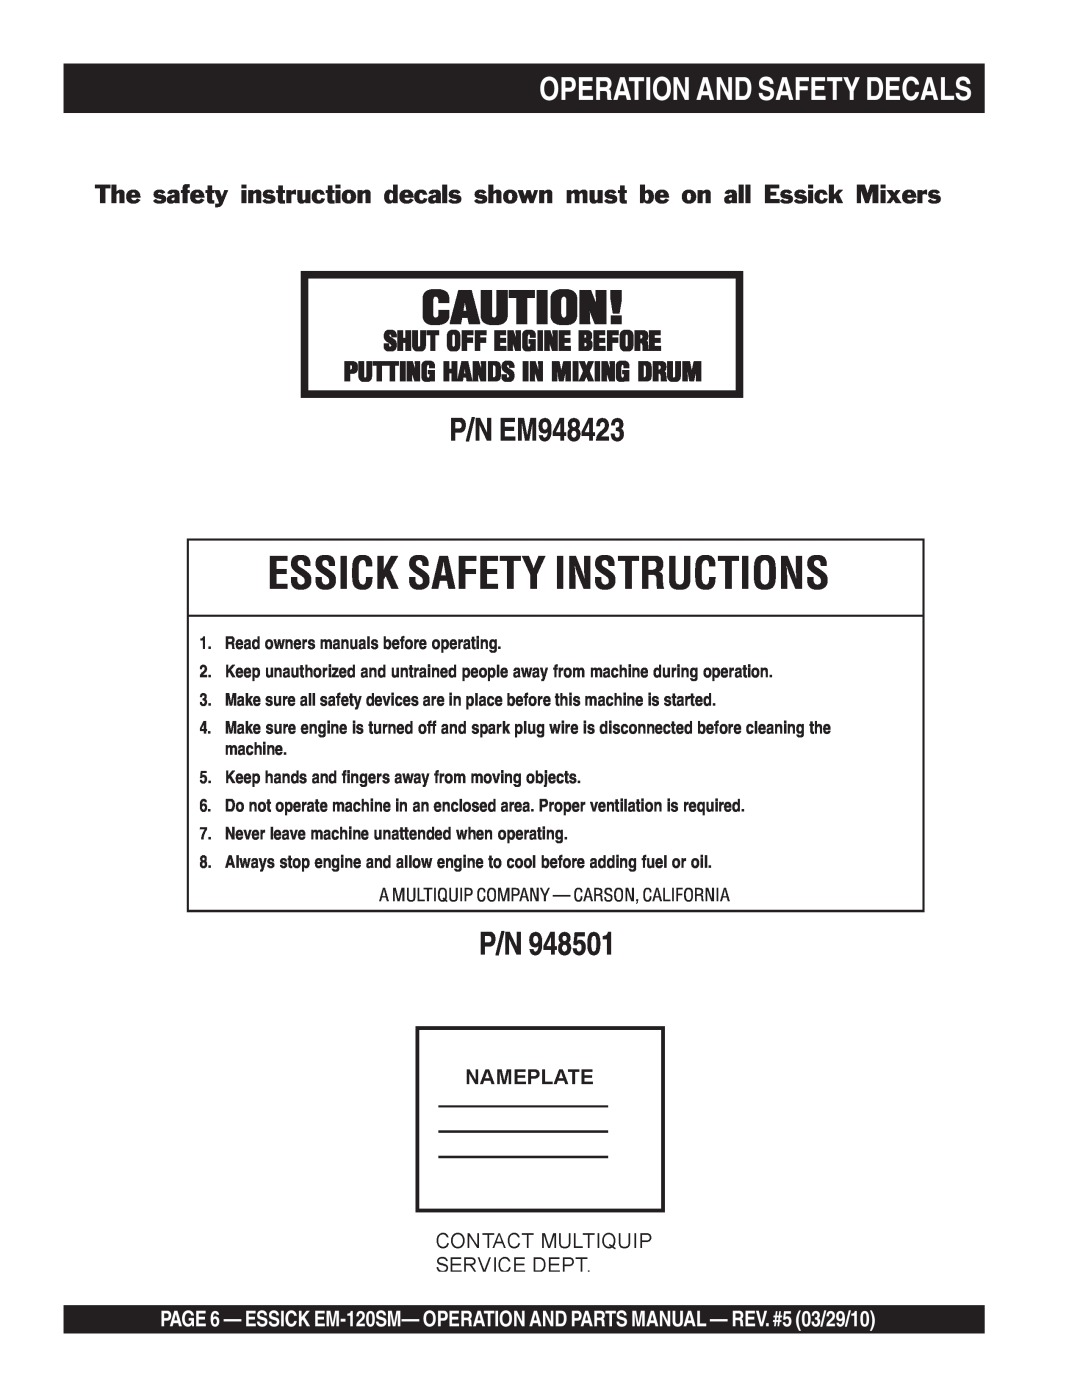 Multiquip EM-120SM manual Operation And Safety Decals, Essick Safety Instructions, P/N EM948423, Shut Off Engine Before 